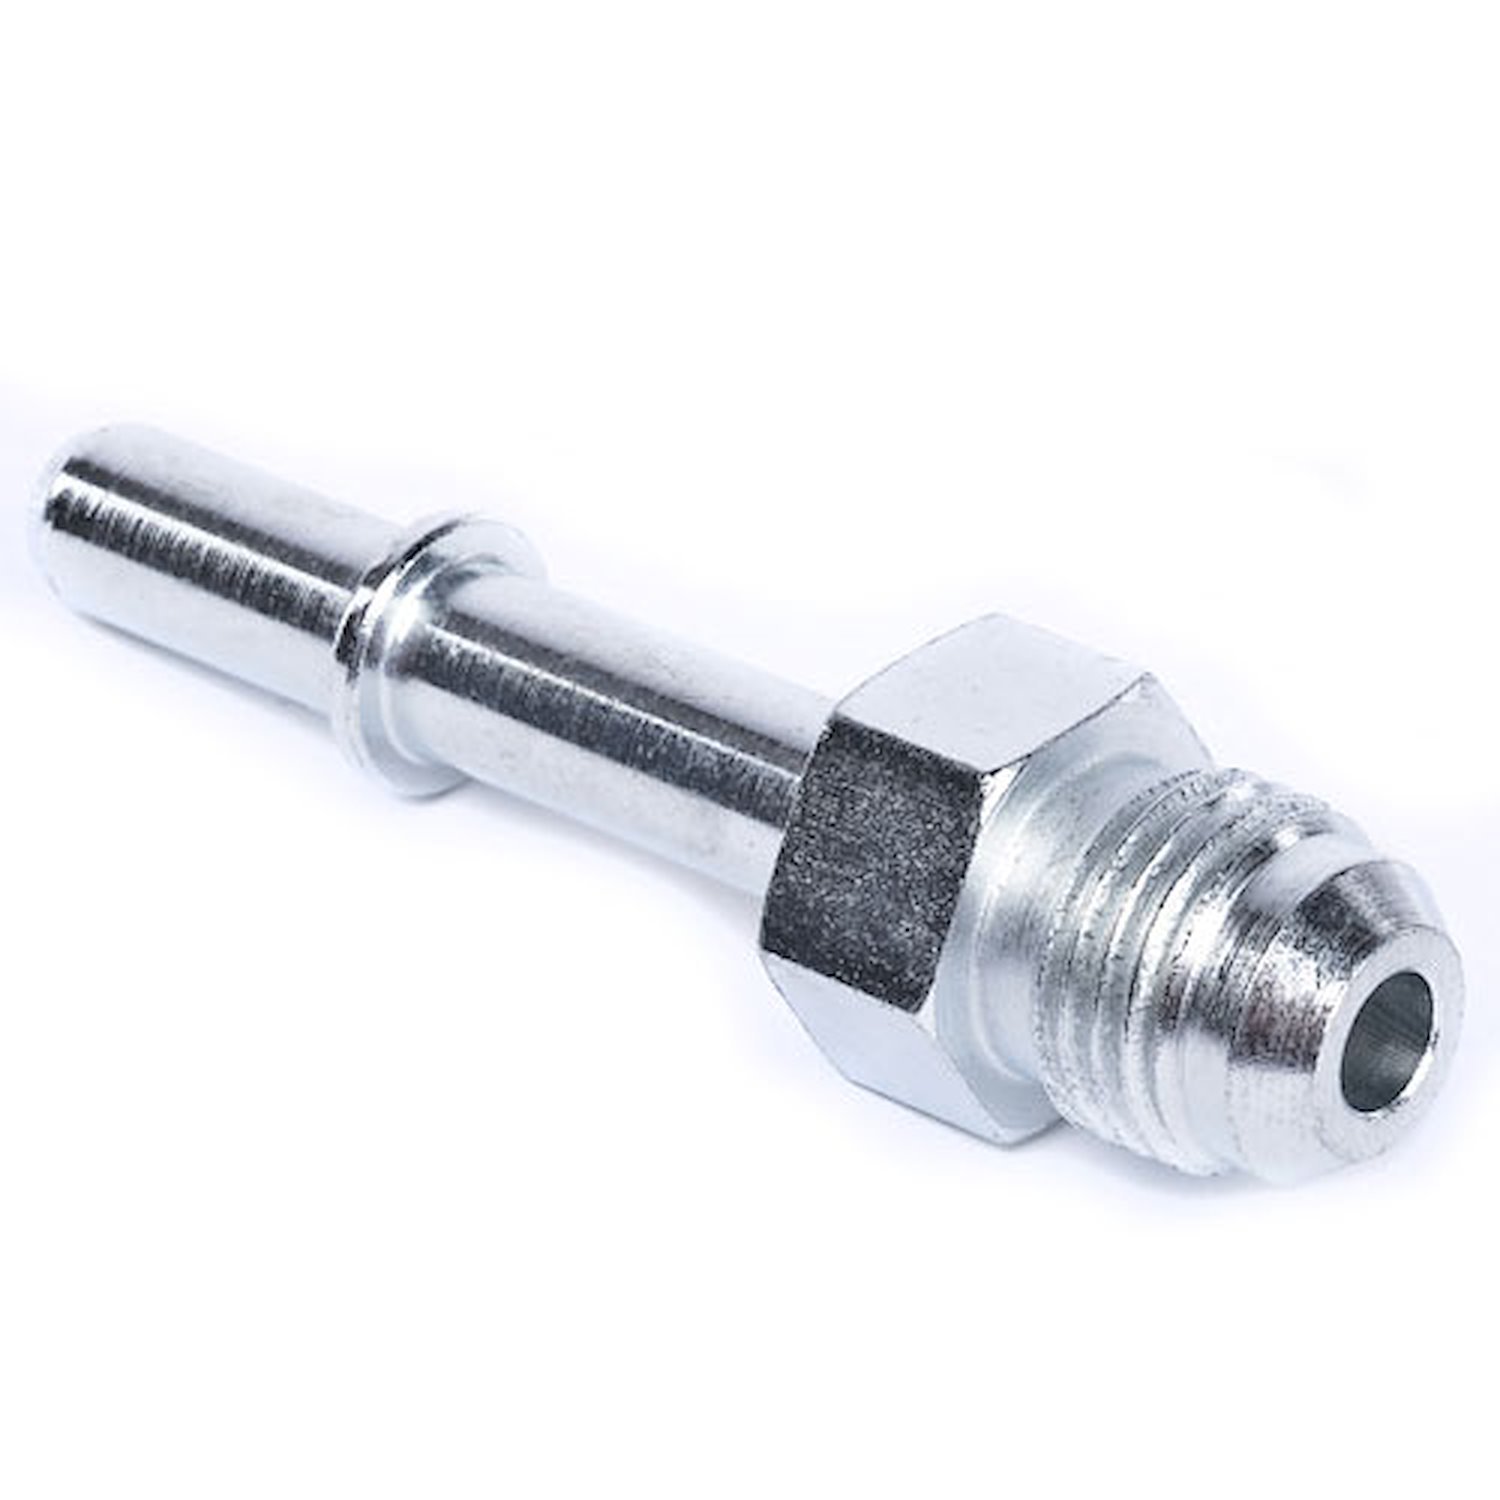 AN to Fuel Injection Quick-Connect Adapter Fitting, Ford Style [-6 AN Male to 5/16 in. Male Quick-Connect]